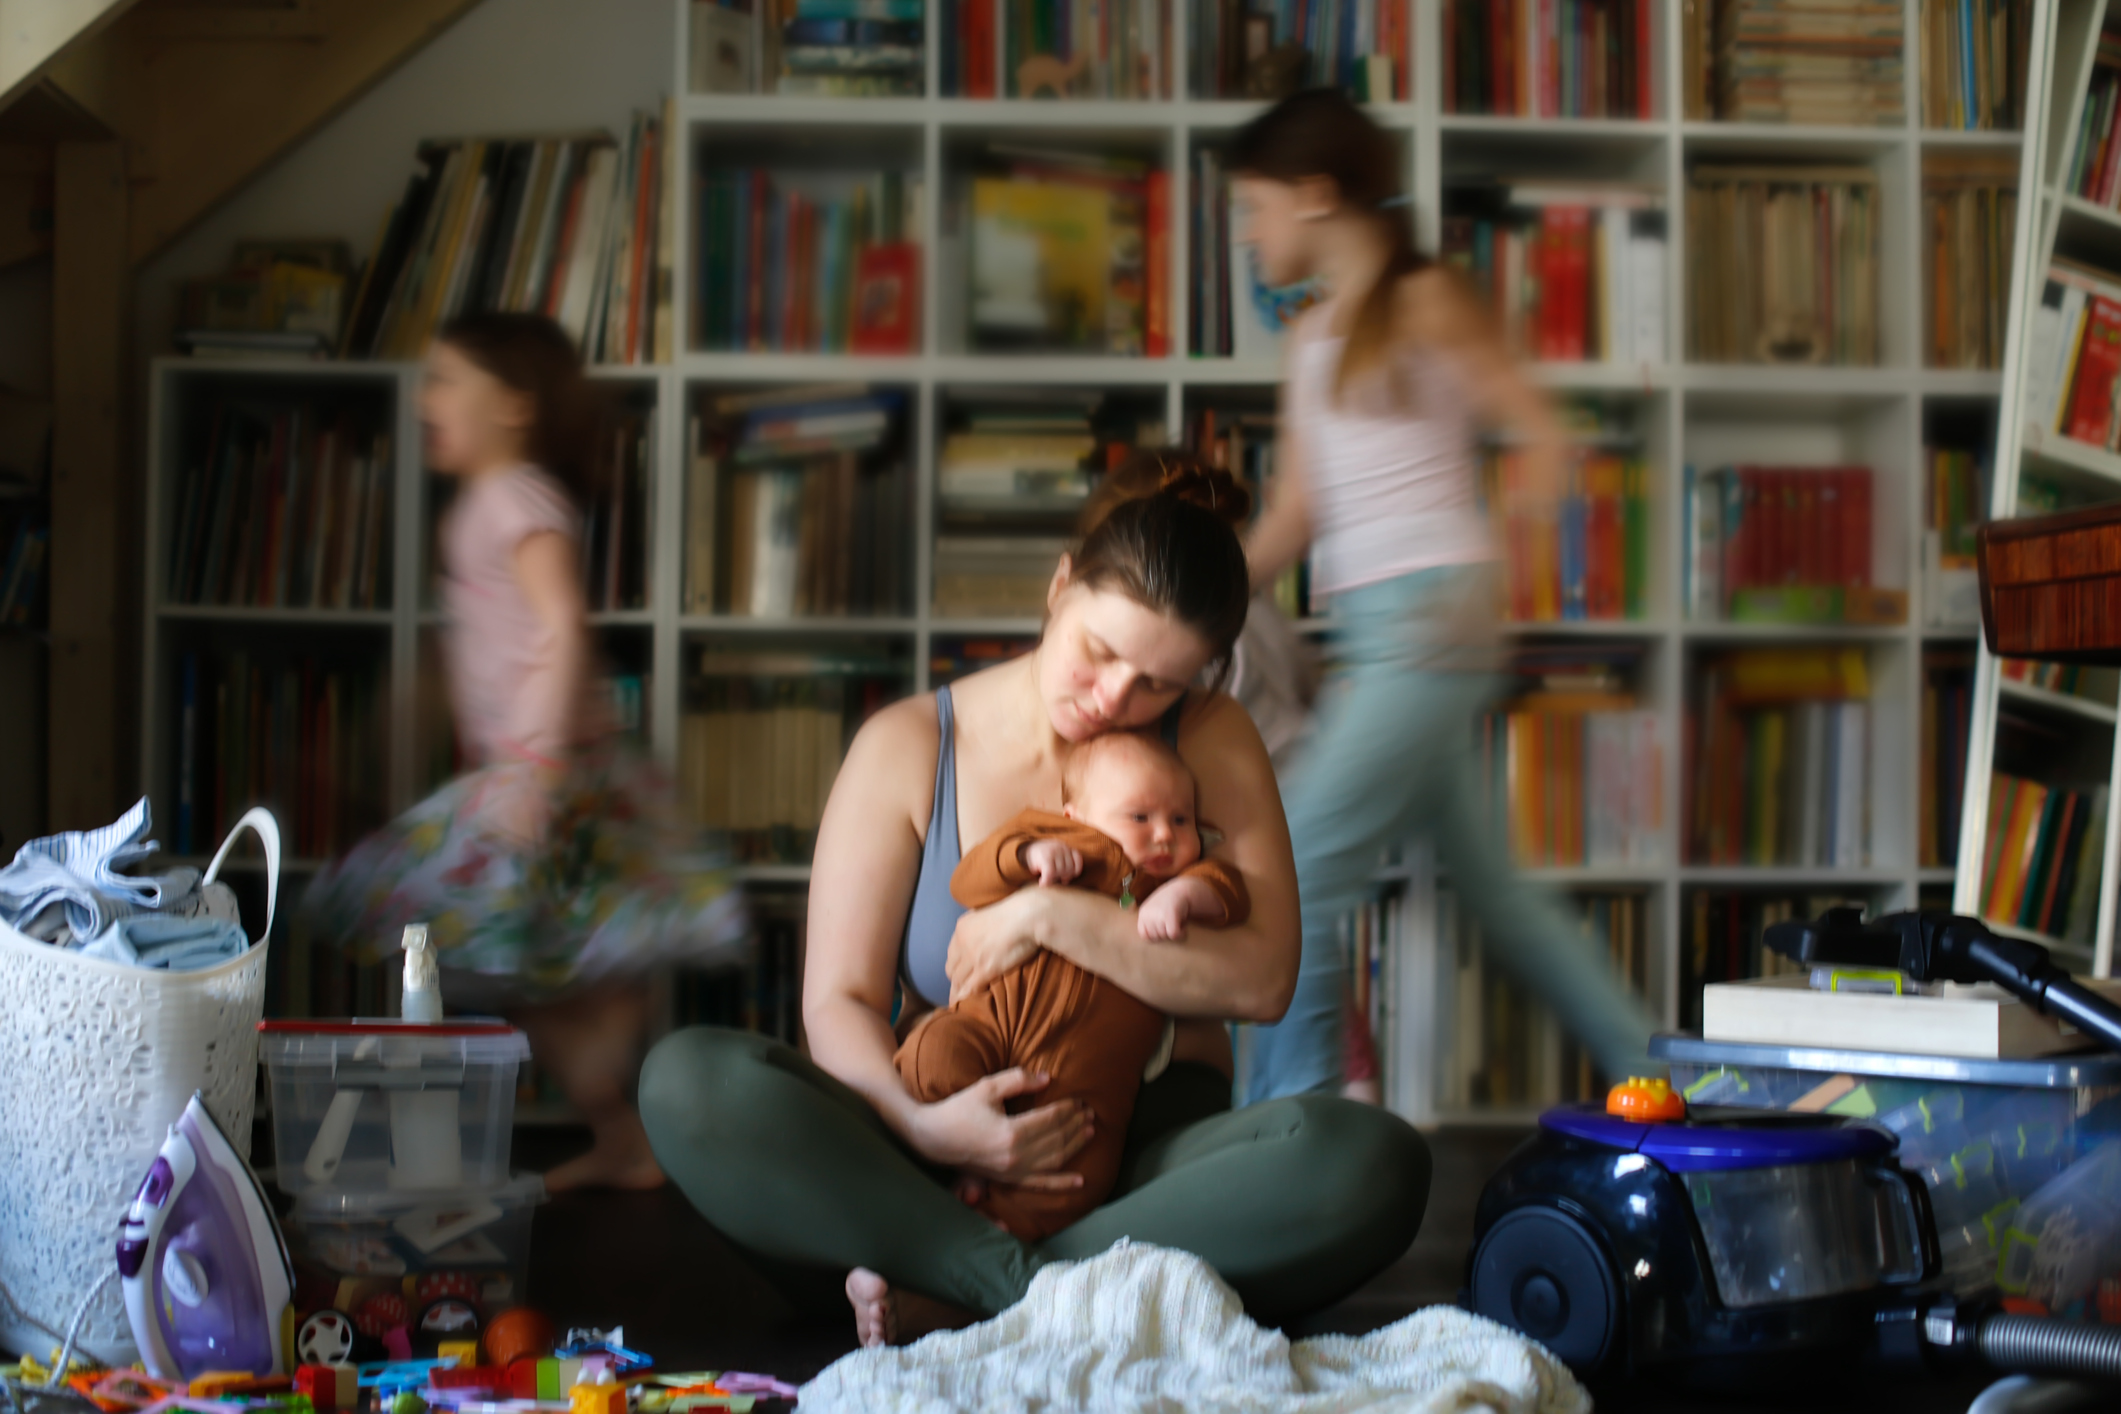 Motherhood Blues: Overwhelmed Mom with Baby, Blurry Running Kids, and the Weight of Household Responsibilities in the Living Room